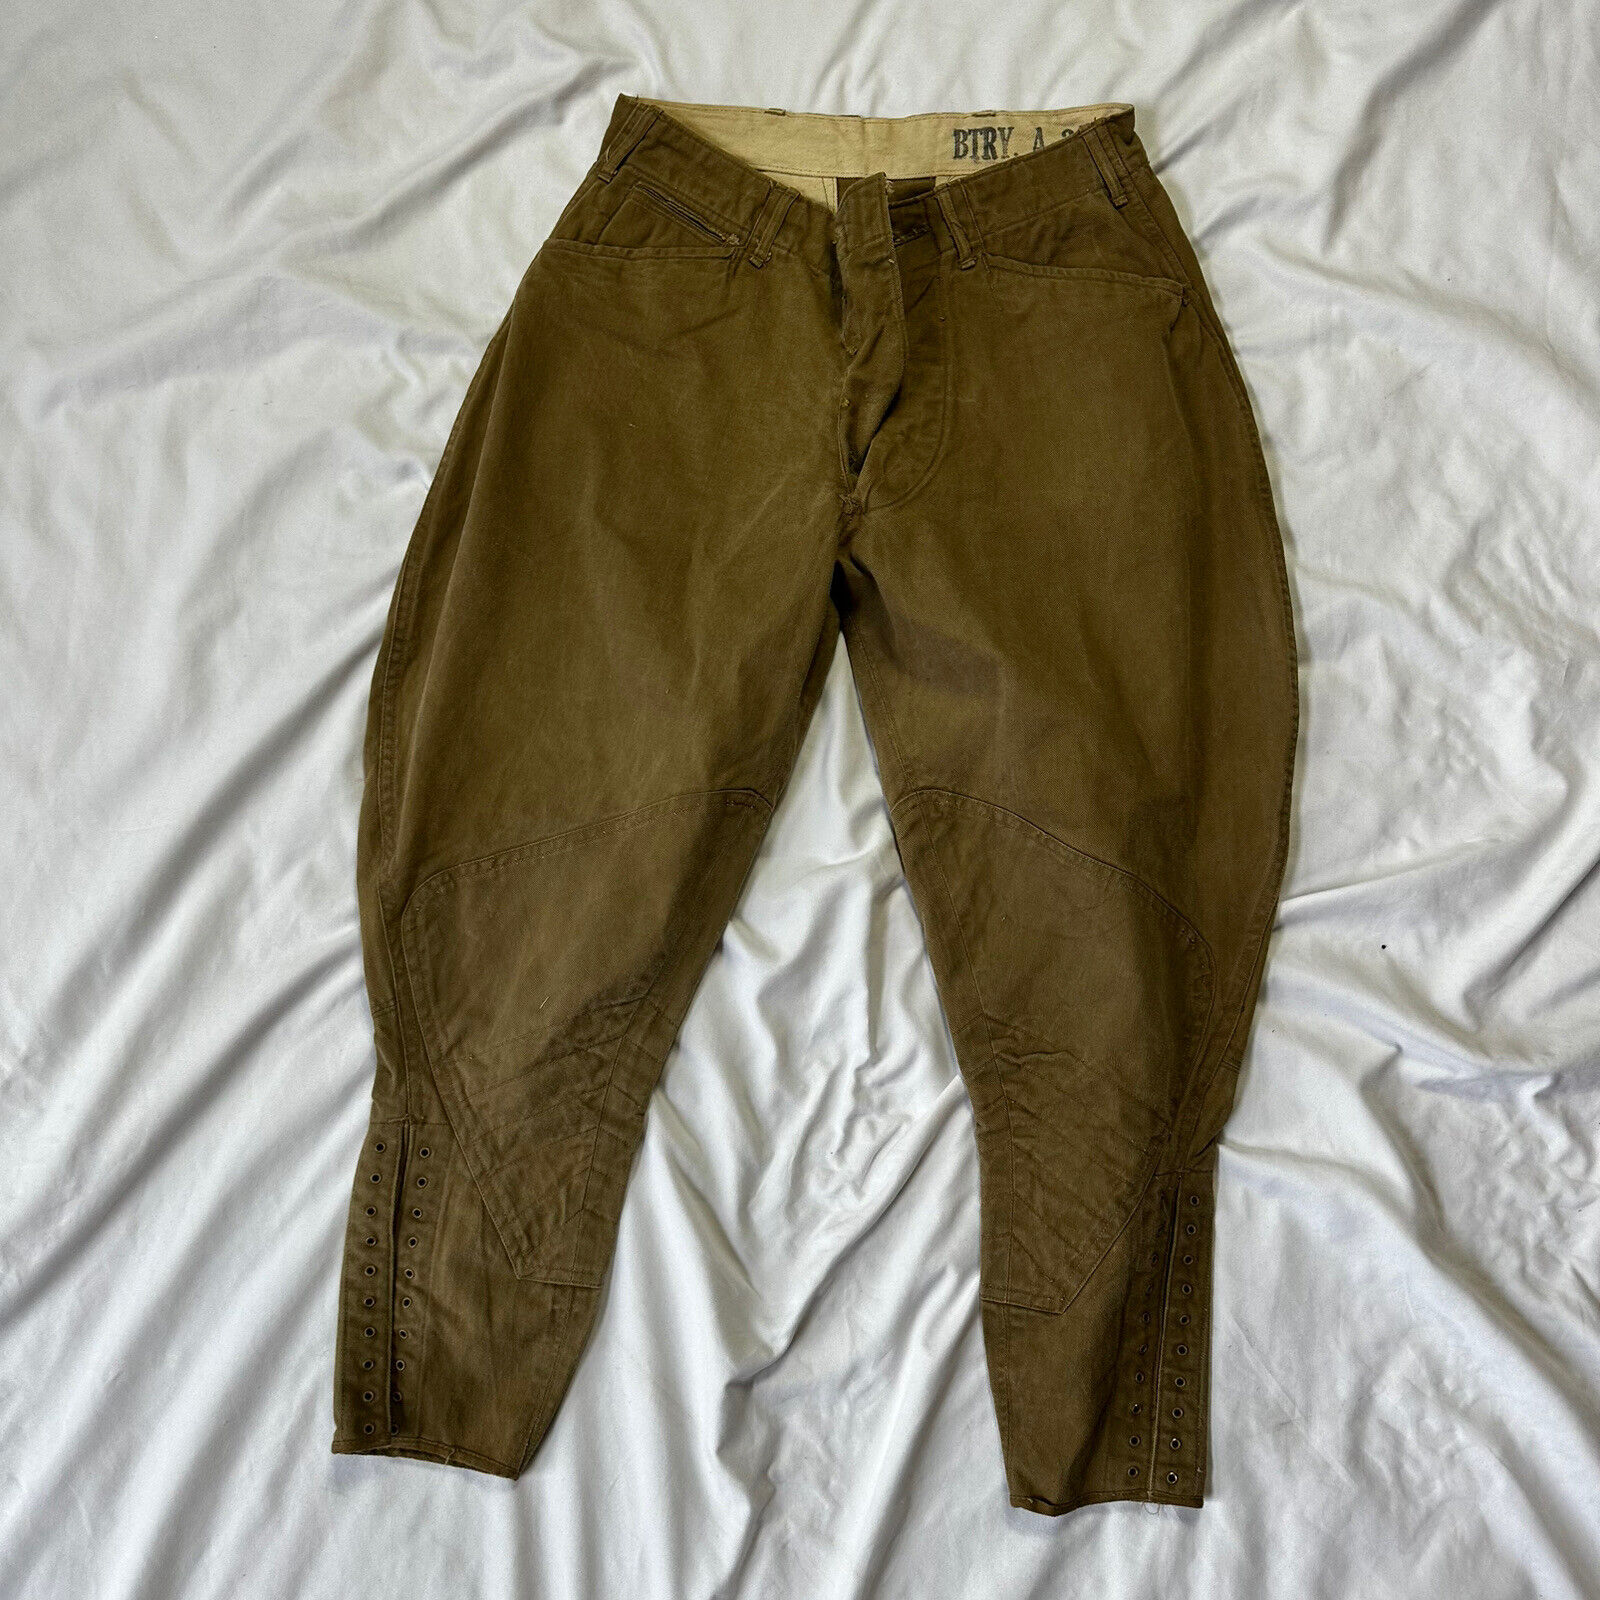 Original WW1 US Army Breeches Pants Stamped Artillery Unit for Sale ...